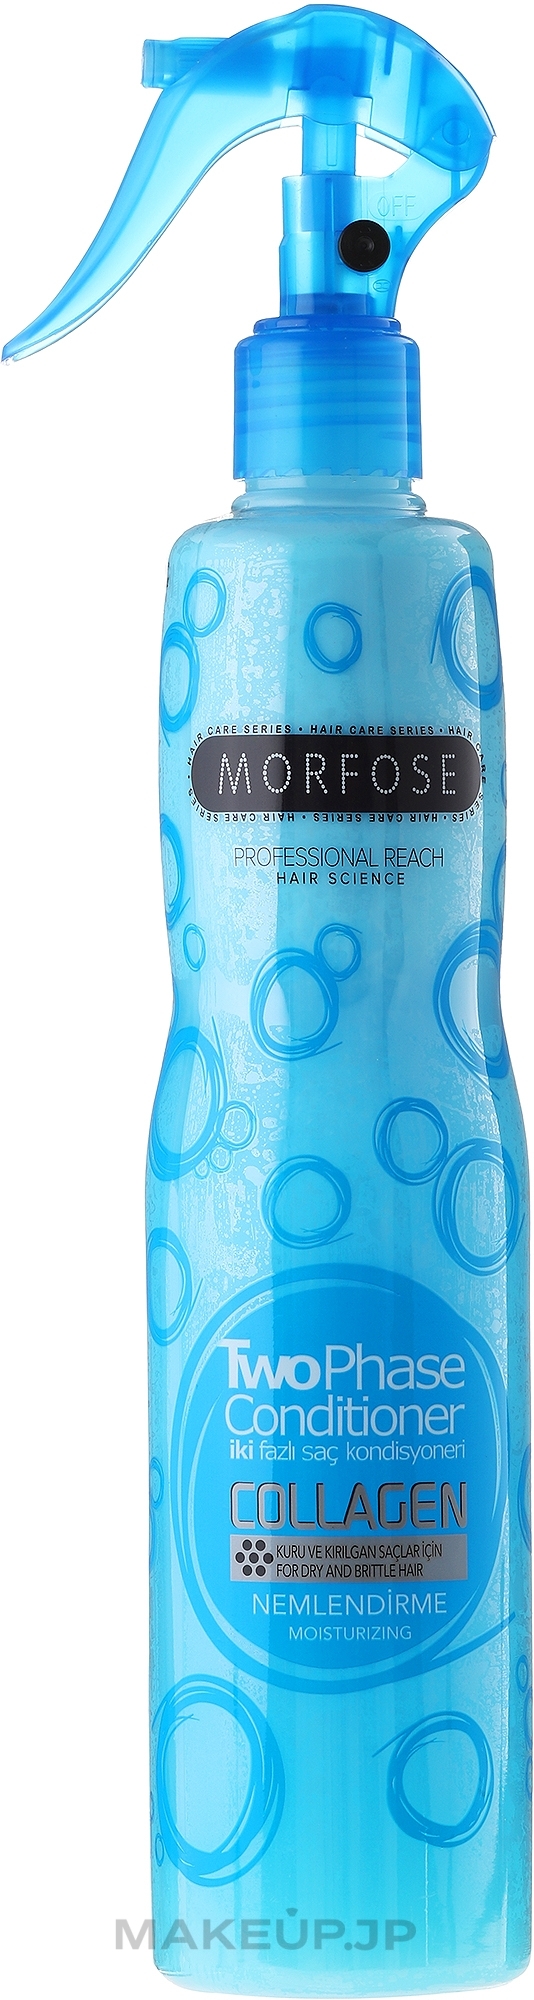 2-Phase Hair Conditioner - Morfose Buble Collagen Conditioner — photo 400 ml